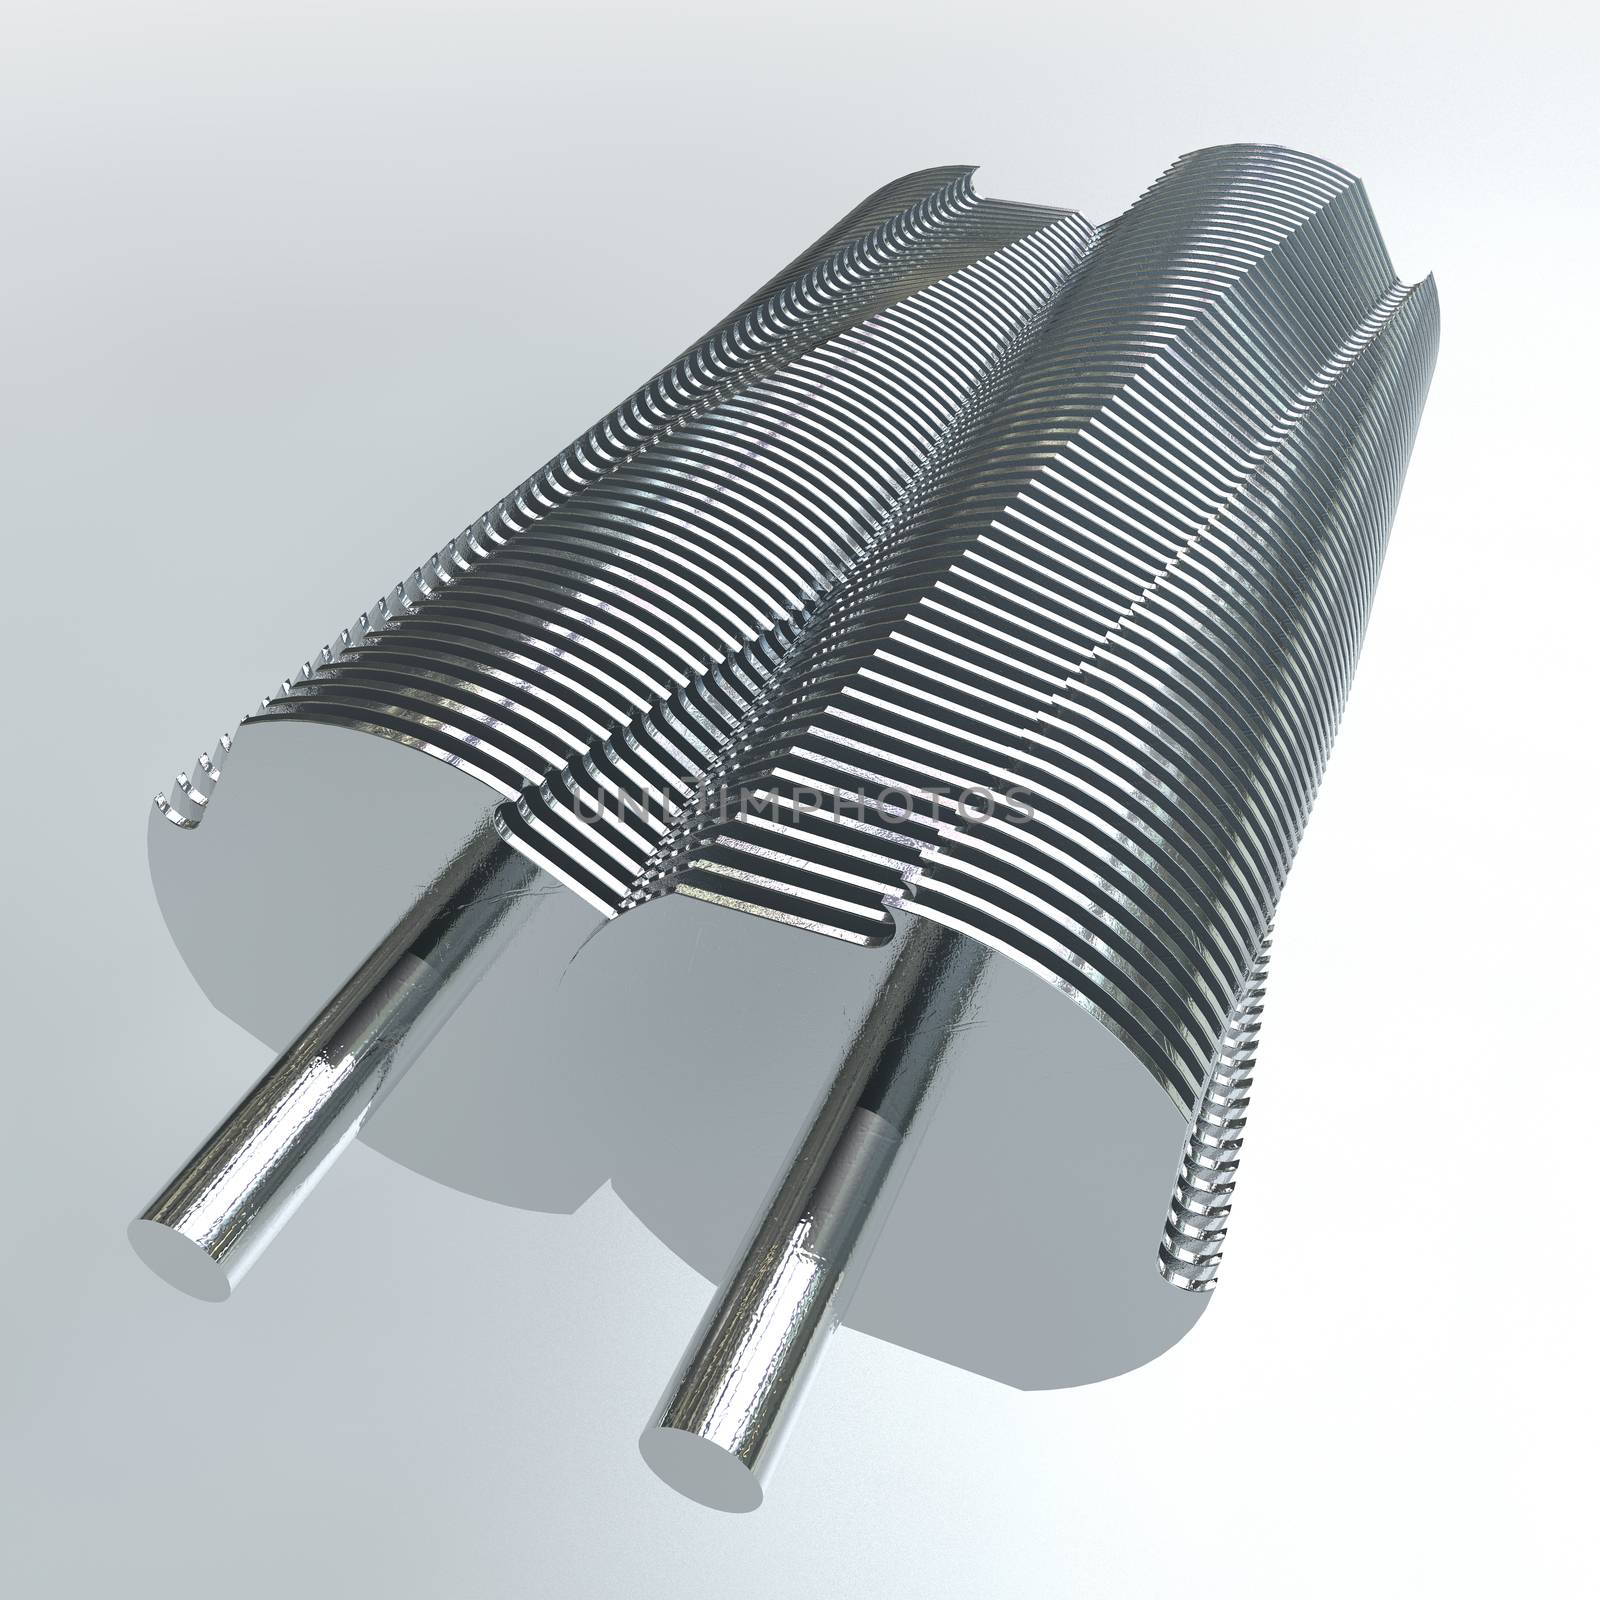 A close up of two cylindrical metal paper shredder blades